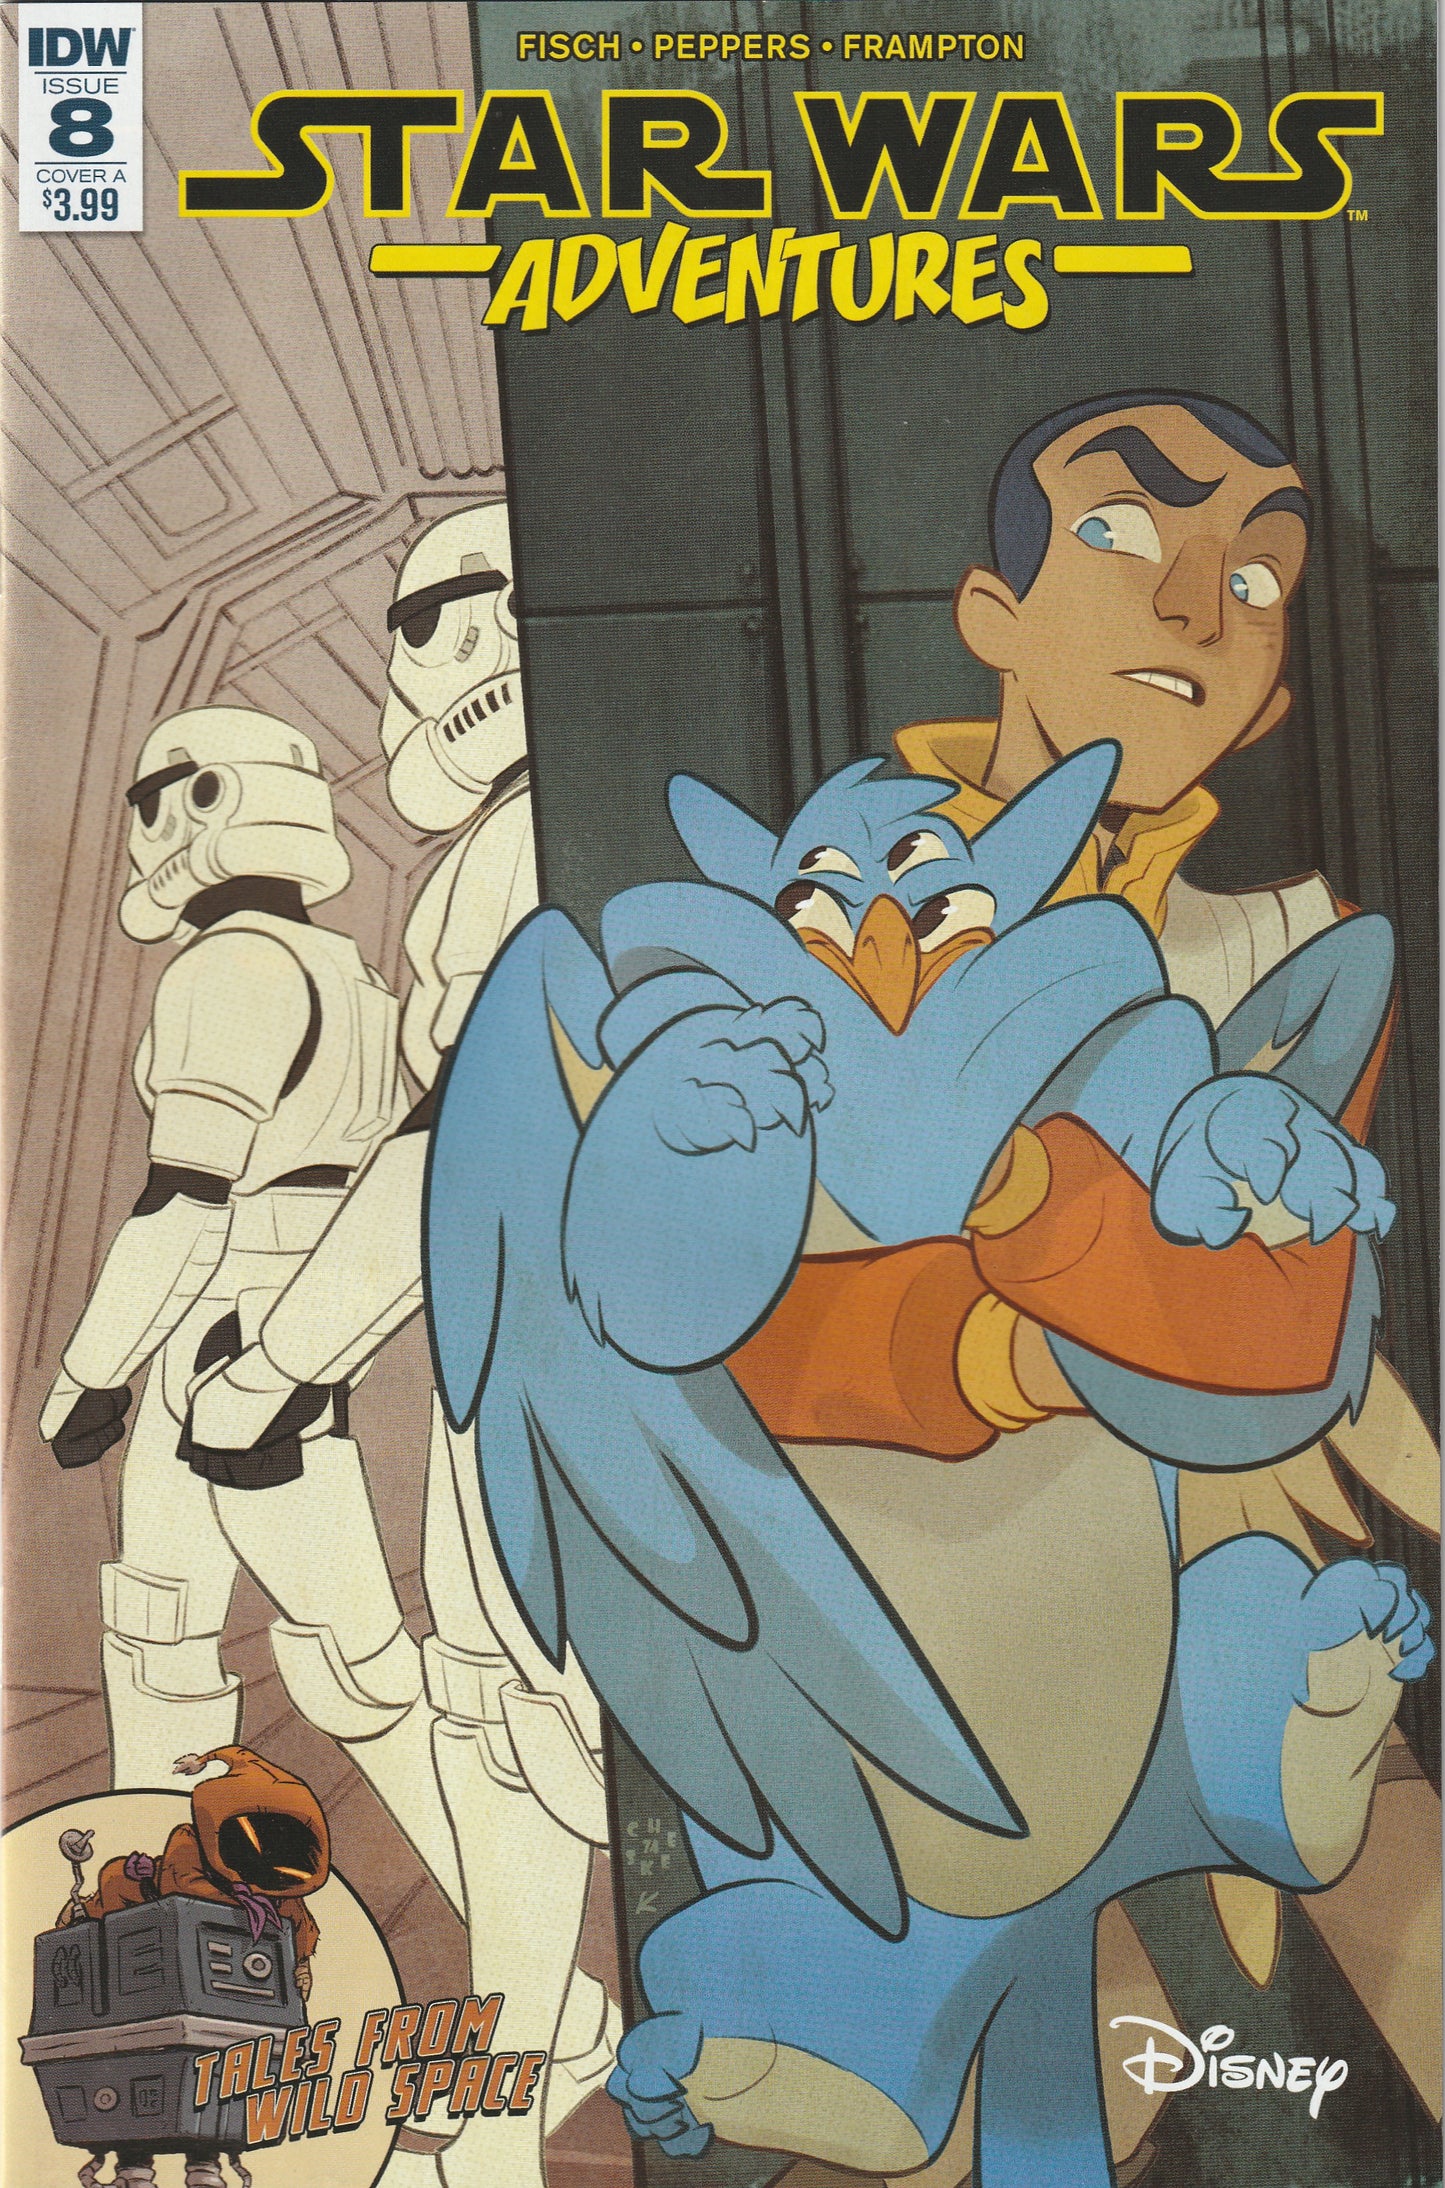 Star Wars Adventures #8 (2018) - Cover A